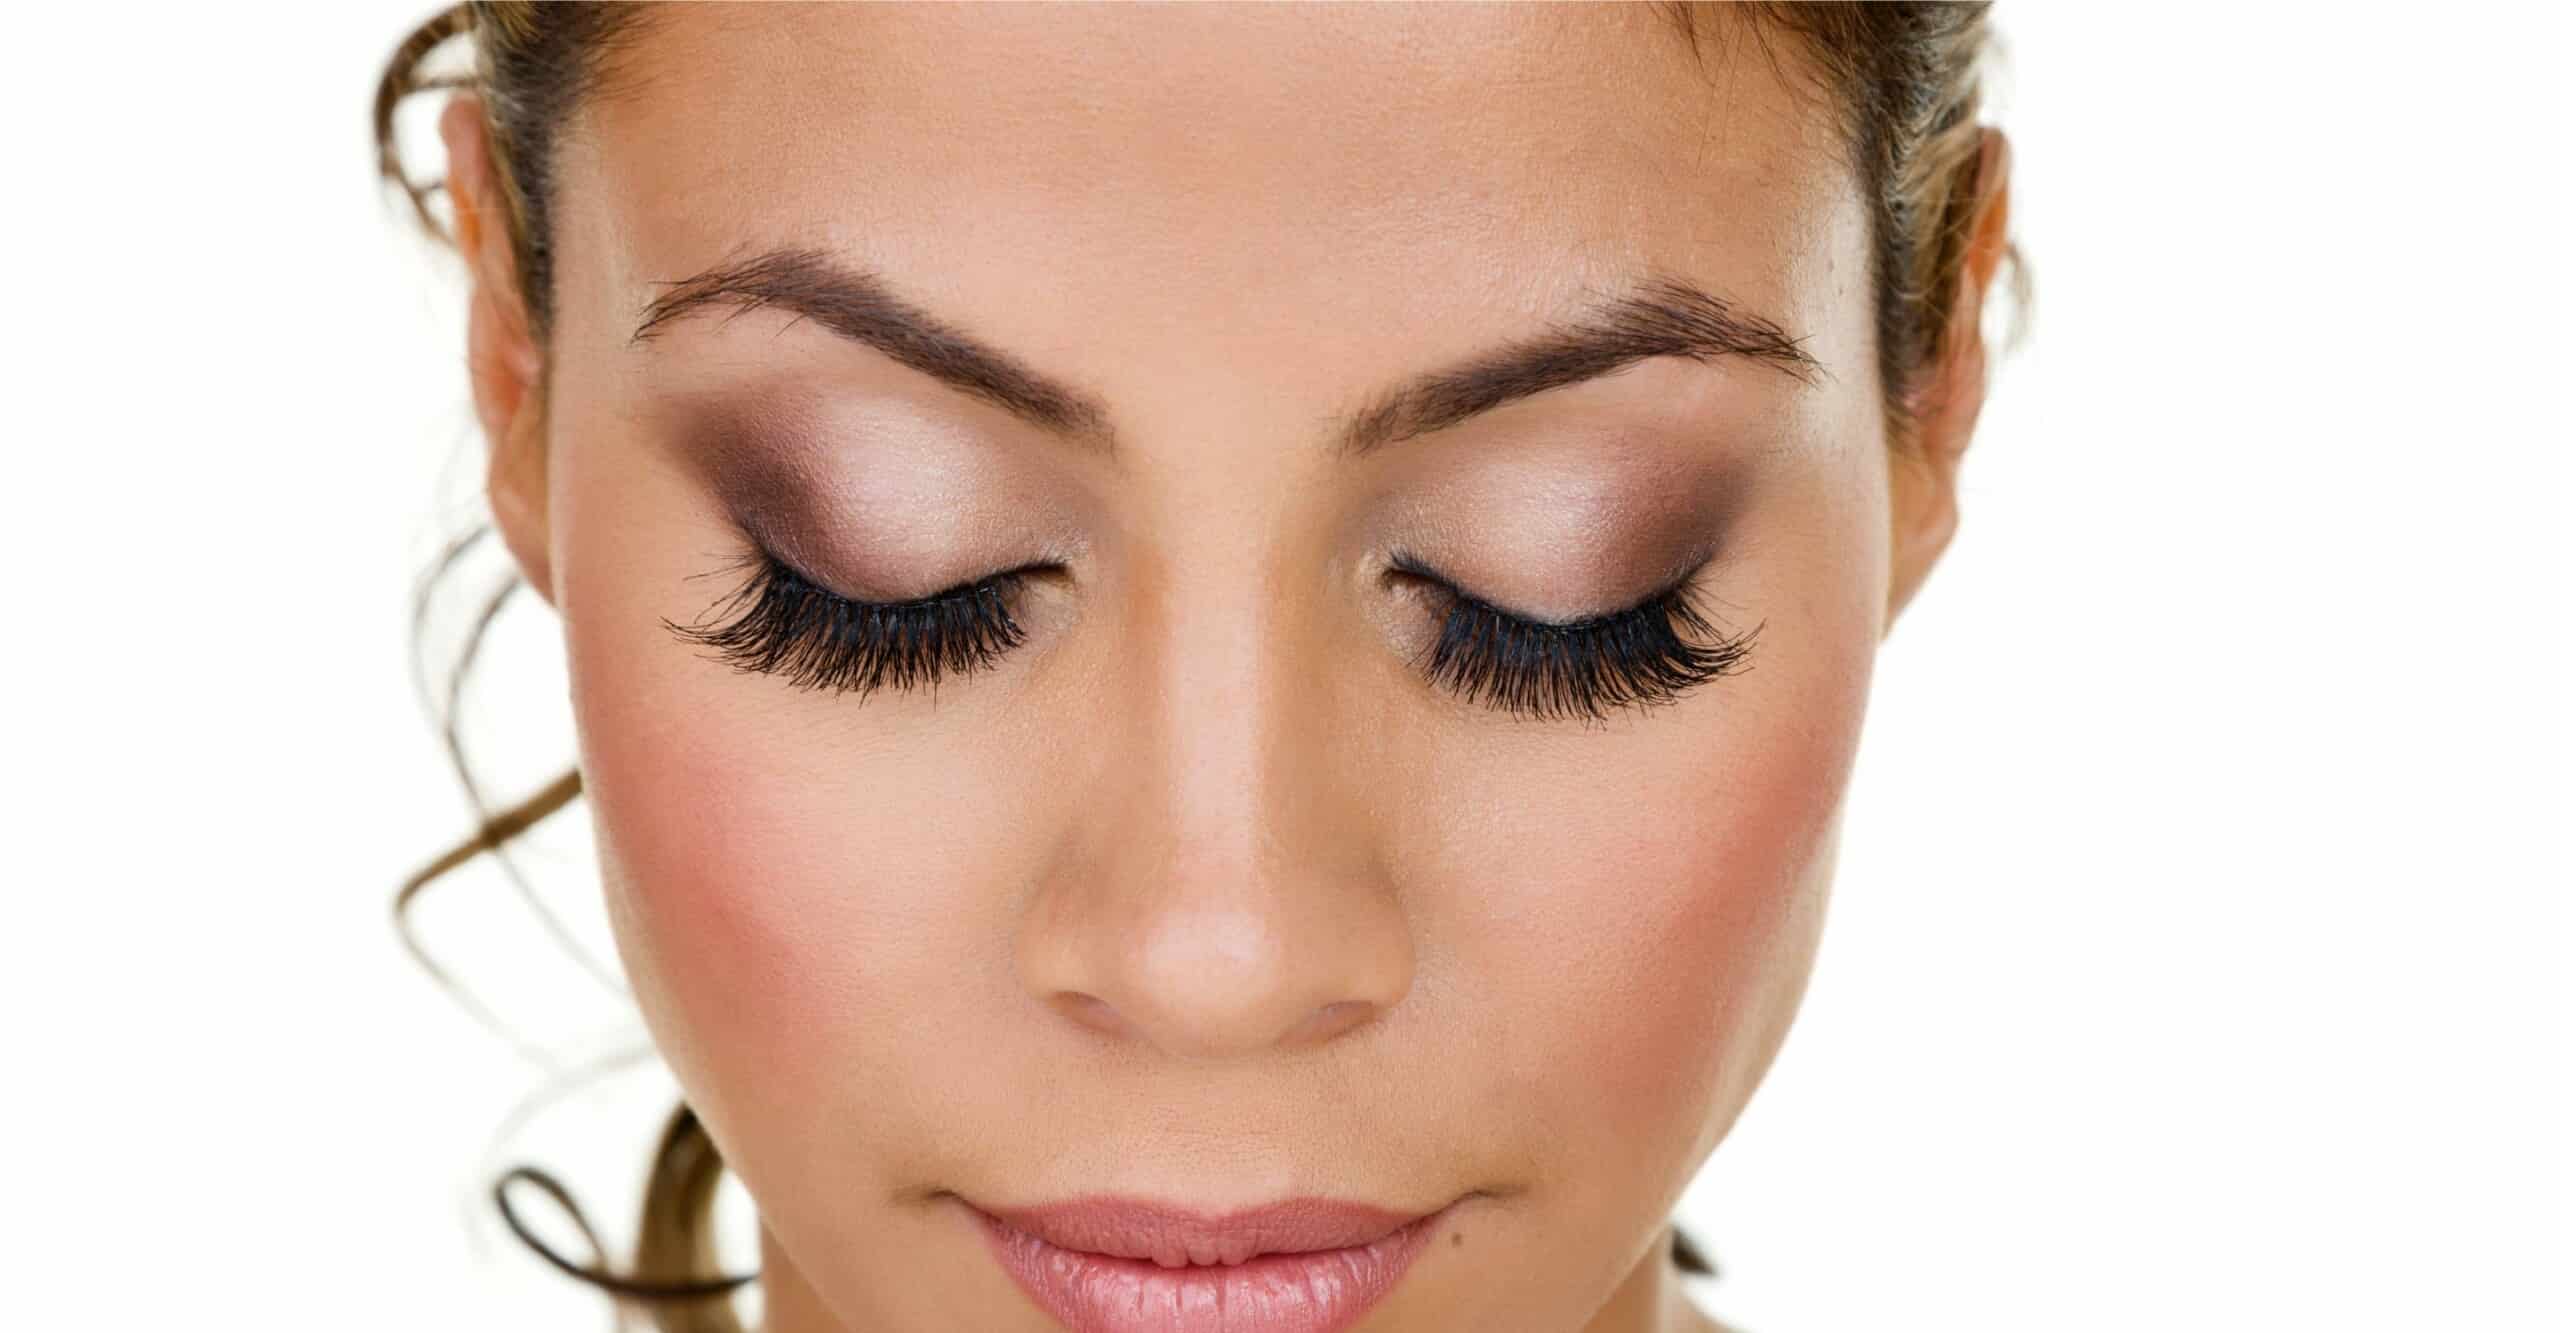 person with closed eyes and long lash extensions